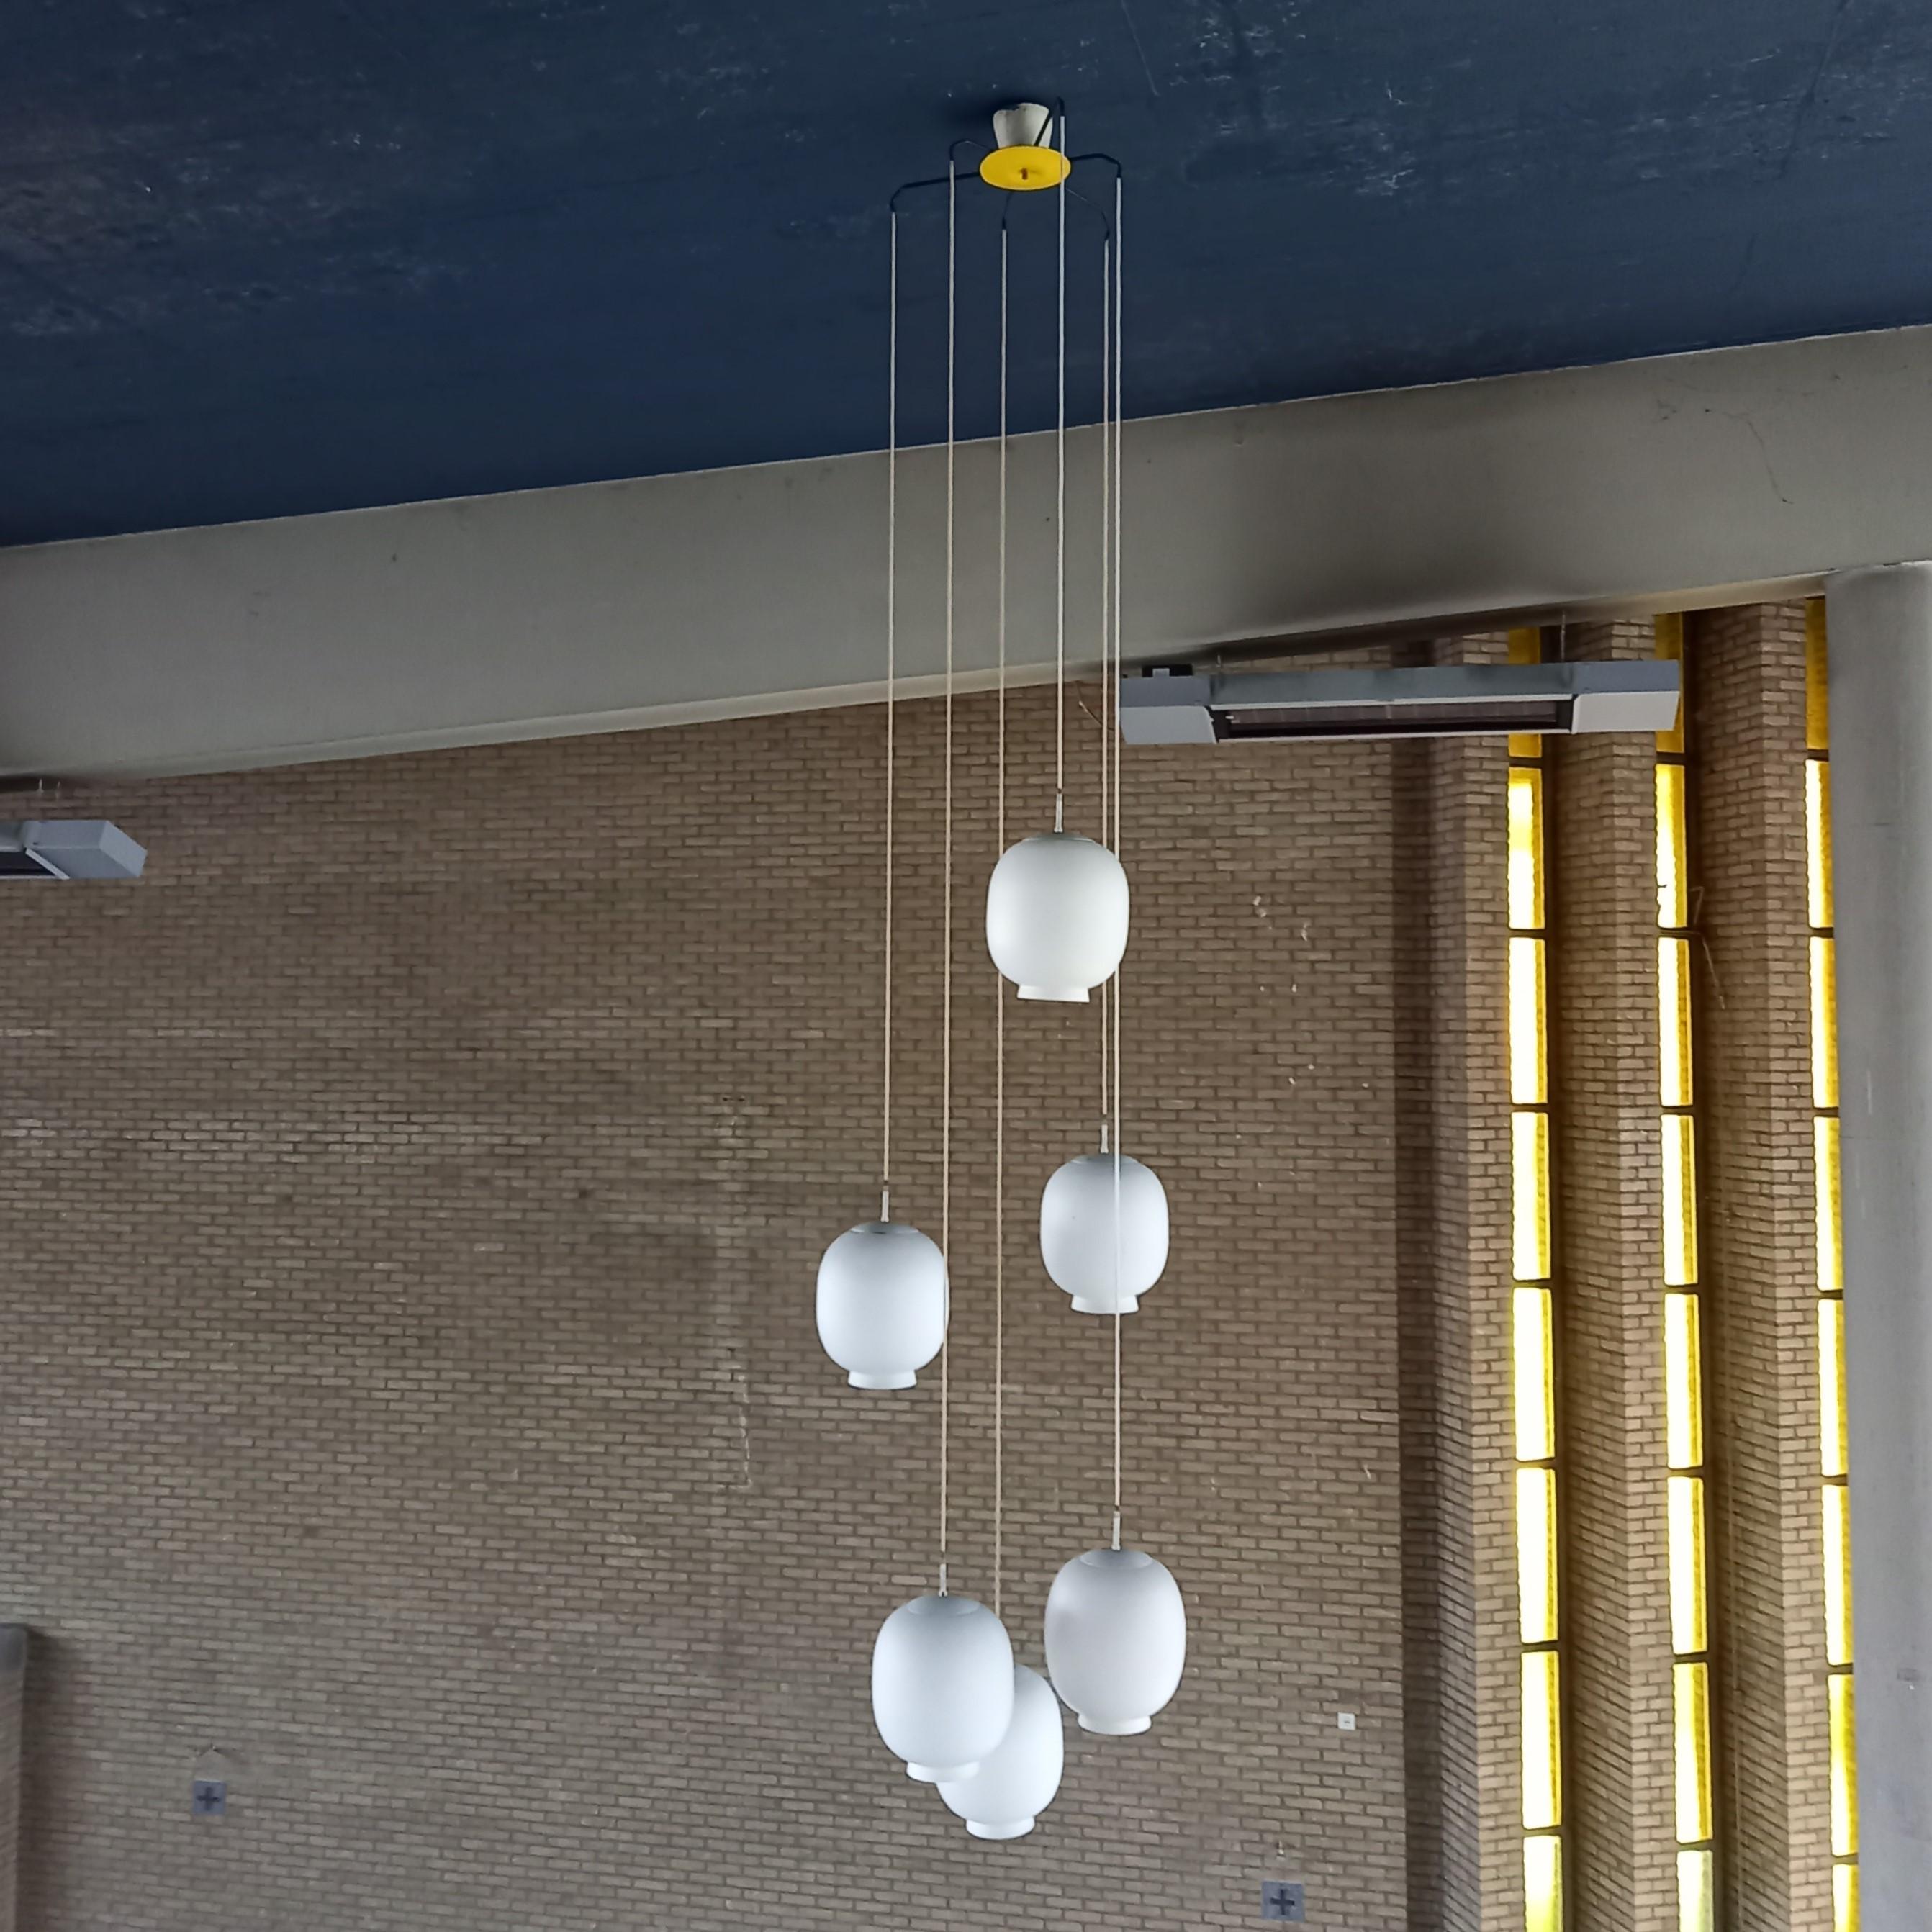 Dutch 4 Vintage Chandeliers by Philips from a Modernist Church, Netherlands, 1960's For Sale